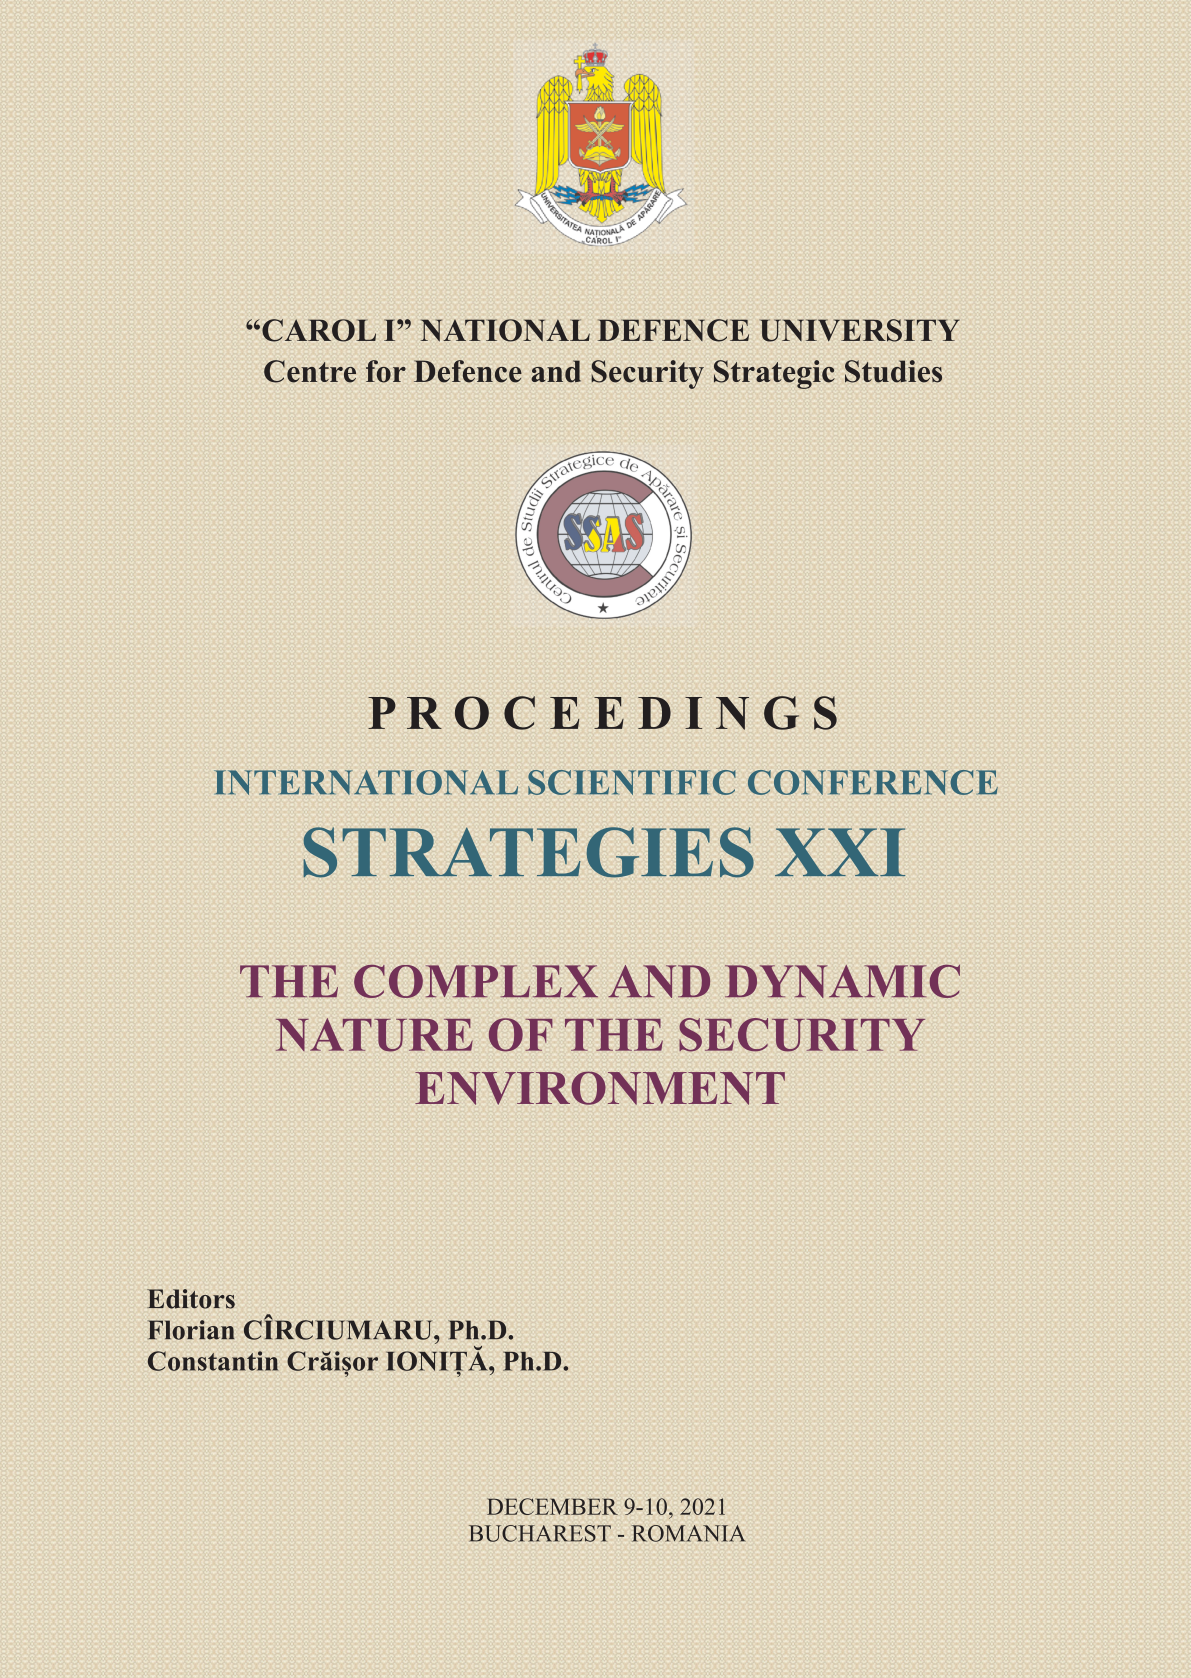 					View 2021:  PROCEEDINGS of the INTERNATIONAL SCIENTIFIC CONFERENCE STRATEGIES XXI - THE COMPLEX AND DYNAMIC NATURE OF THE SECURITY ENVIRONMENT
				